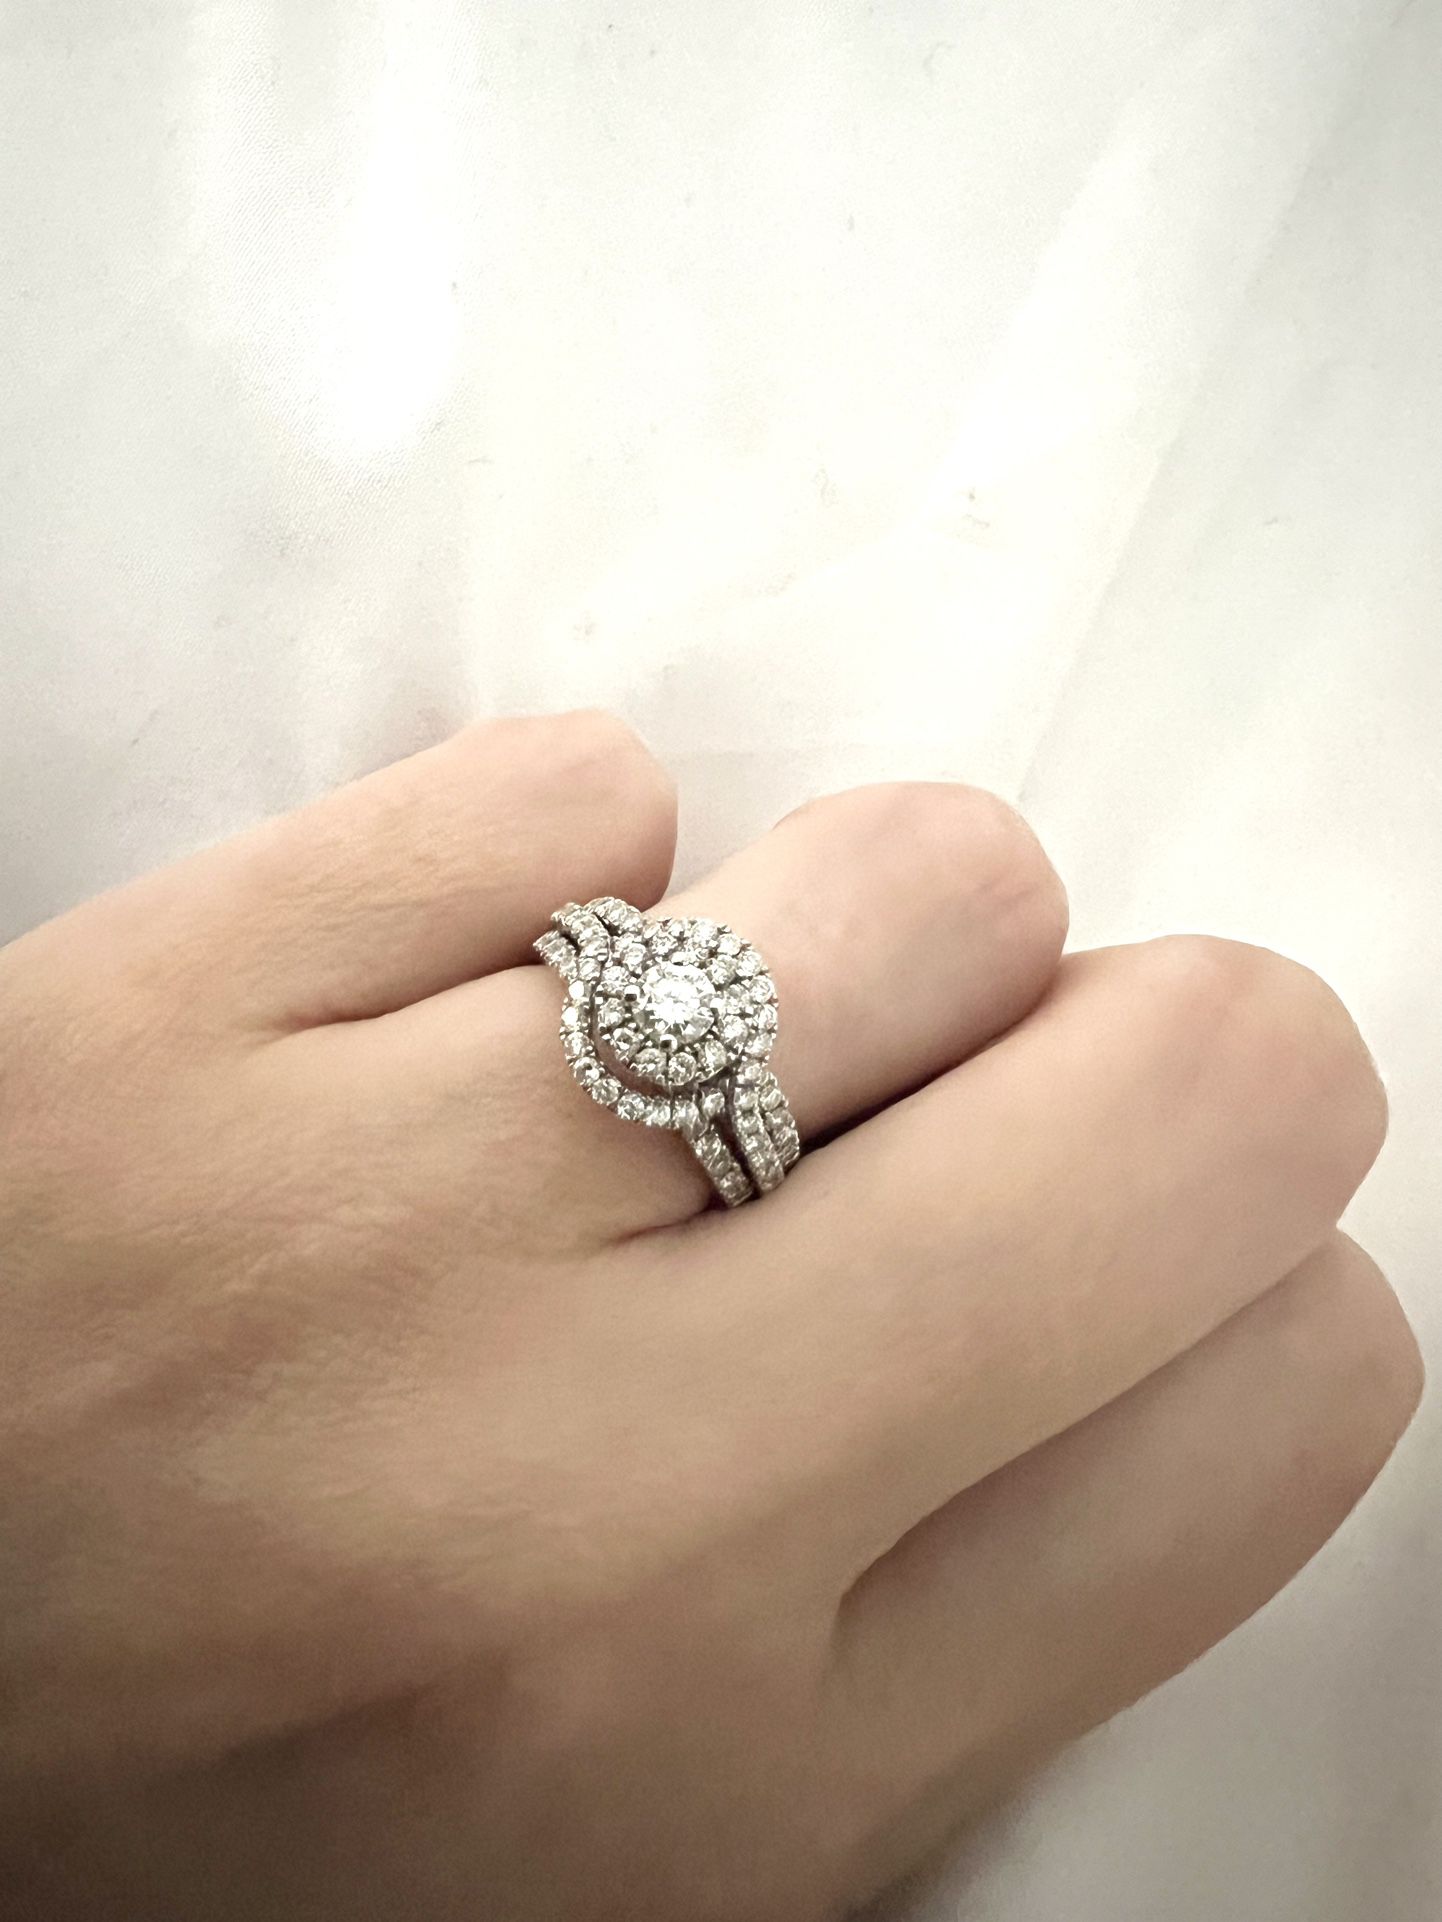 Beautiful Engagement Ring - Less Than A Year Old